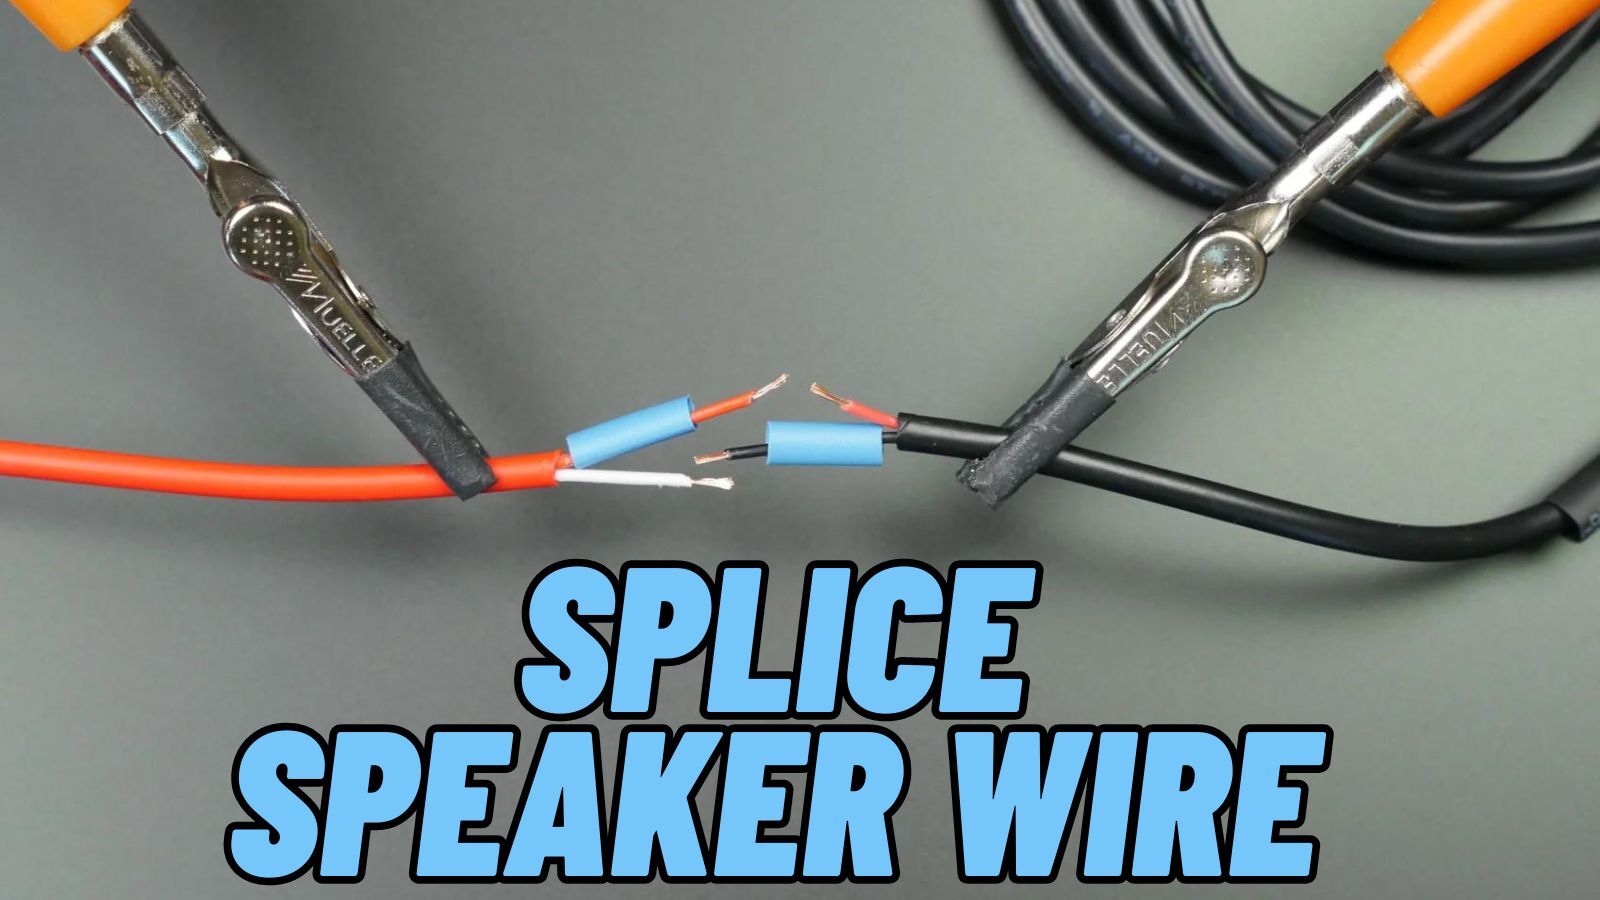 Splice Speaker Wire: The Benefits and Step-by-Step Guide